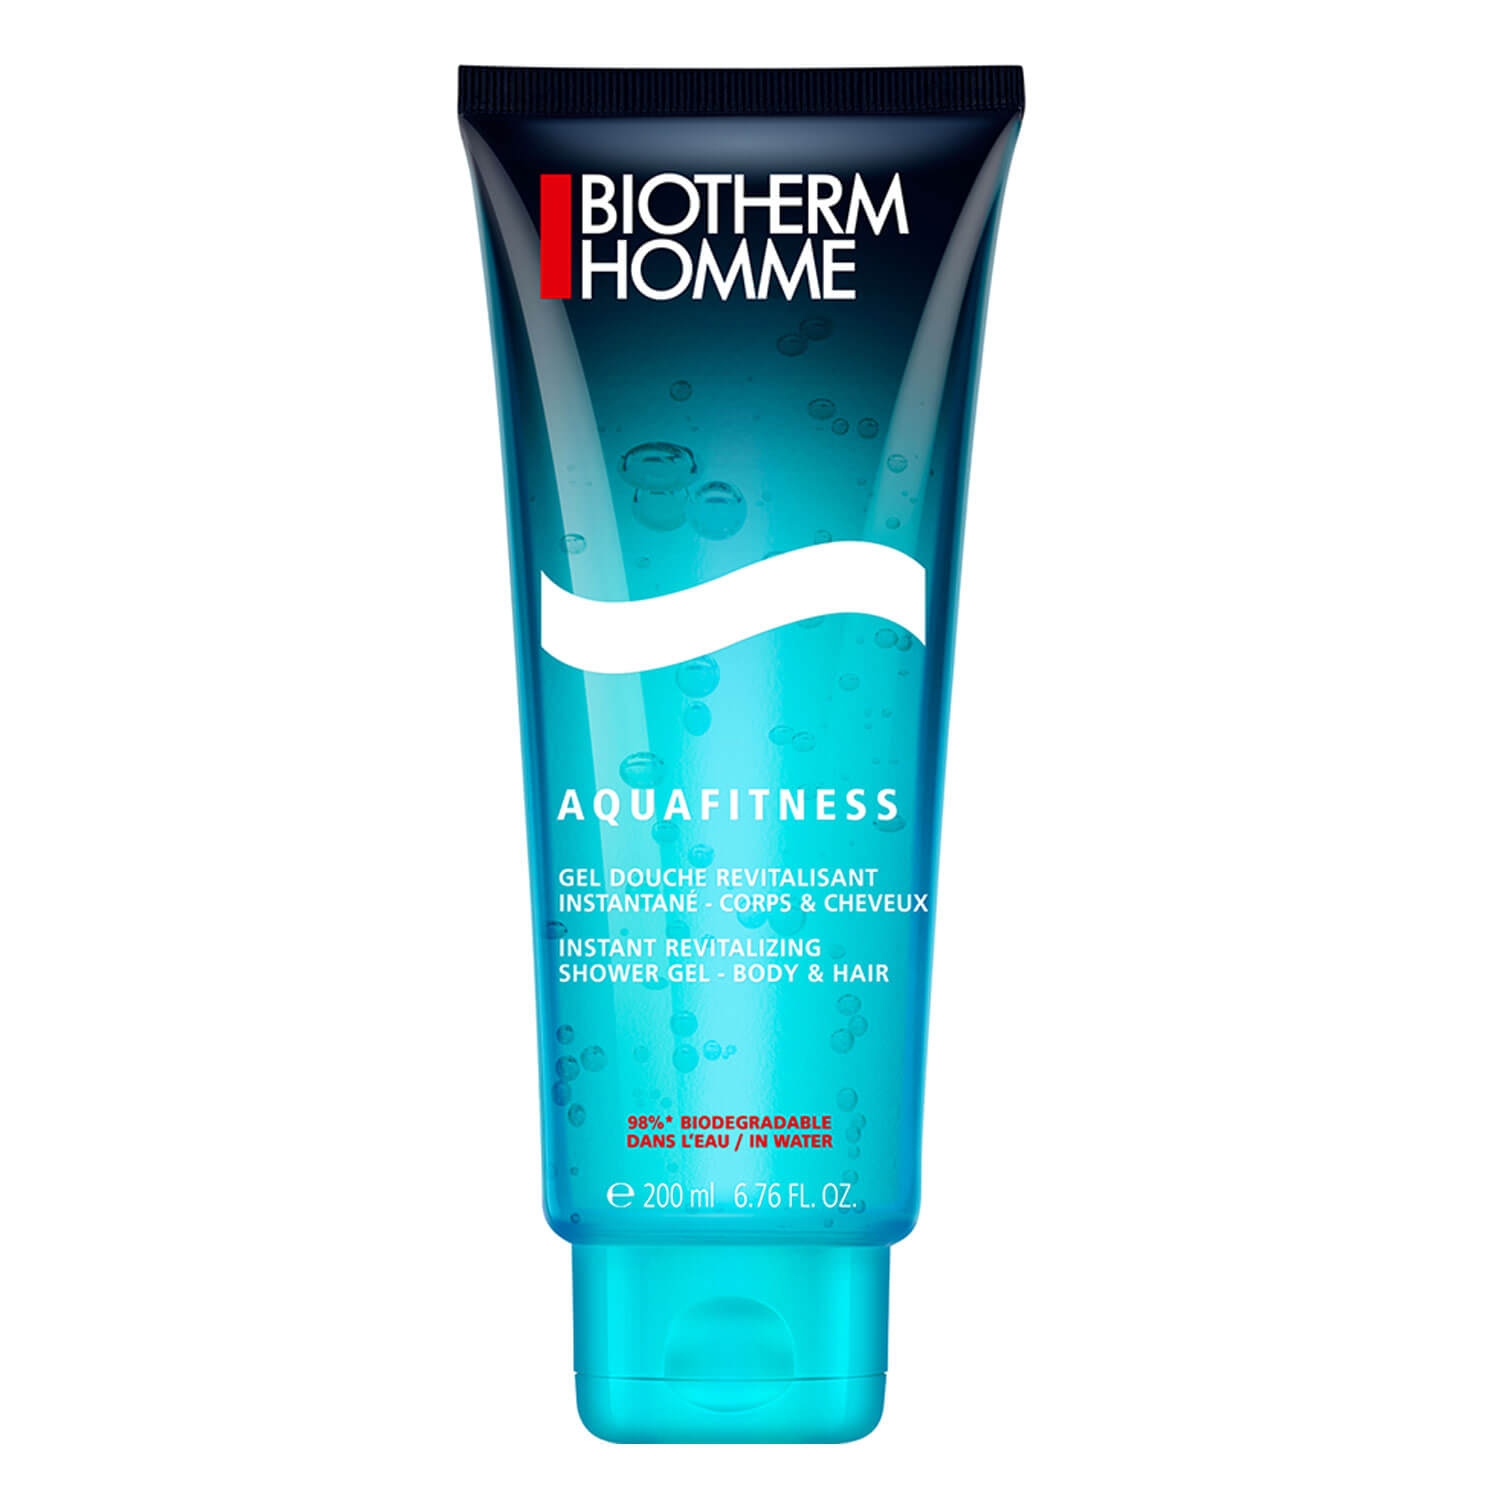 Product image from Biotherm Homme - Aquafitness Shower Gel